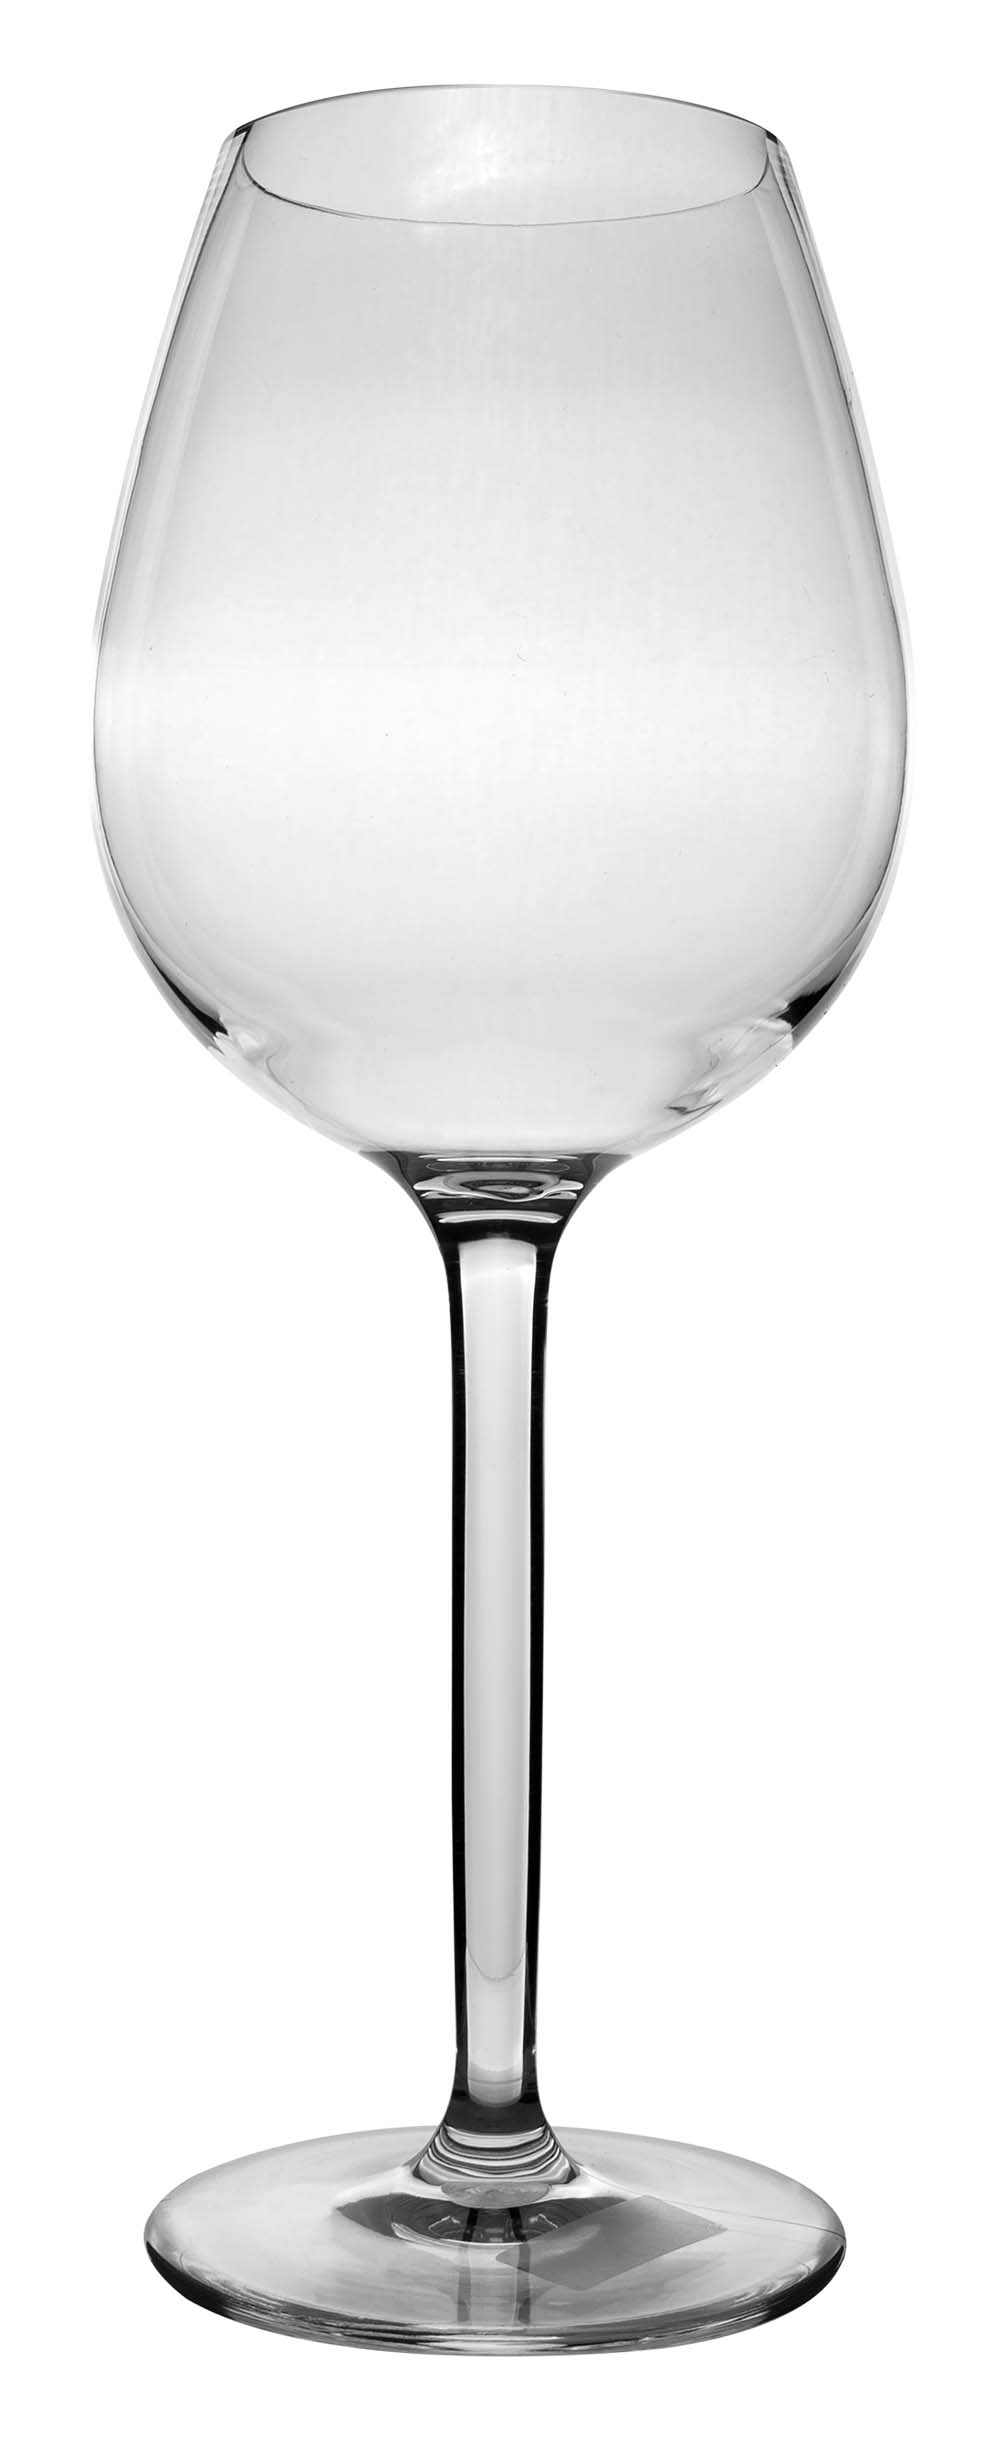 6101466 An almost unbreakable luxury red wine glass with a round and stylish design. Dishwasher safe, lightweight and even better scratch resistant. Made of strong tritan. A set of 2 glasses. The glasses are BPA free.